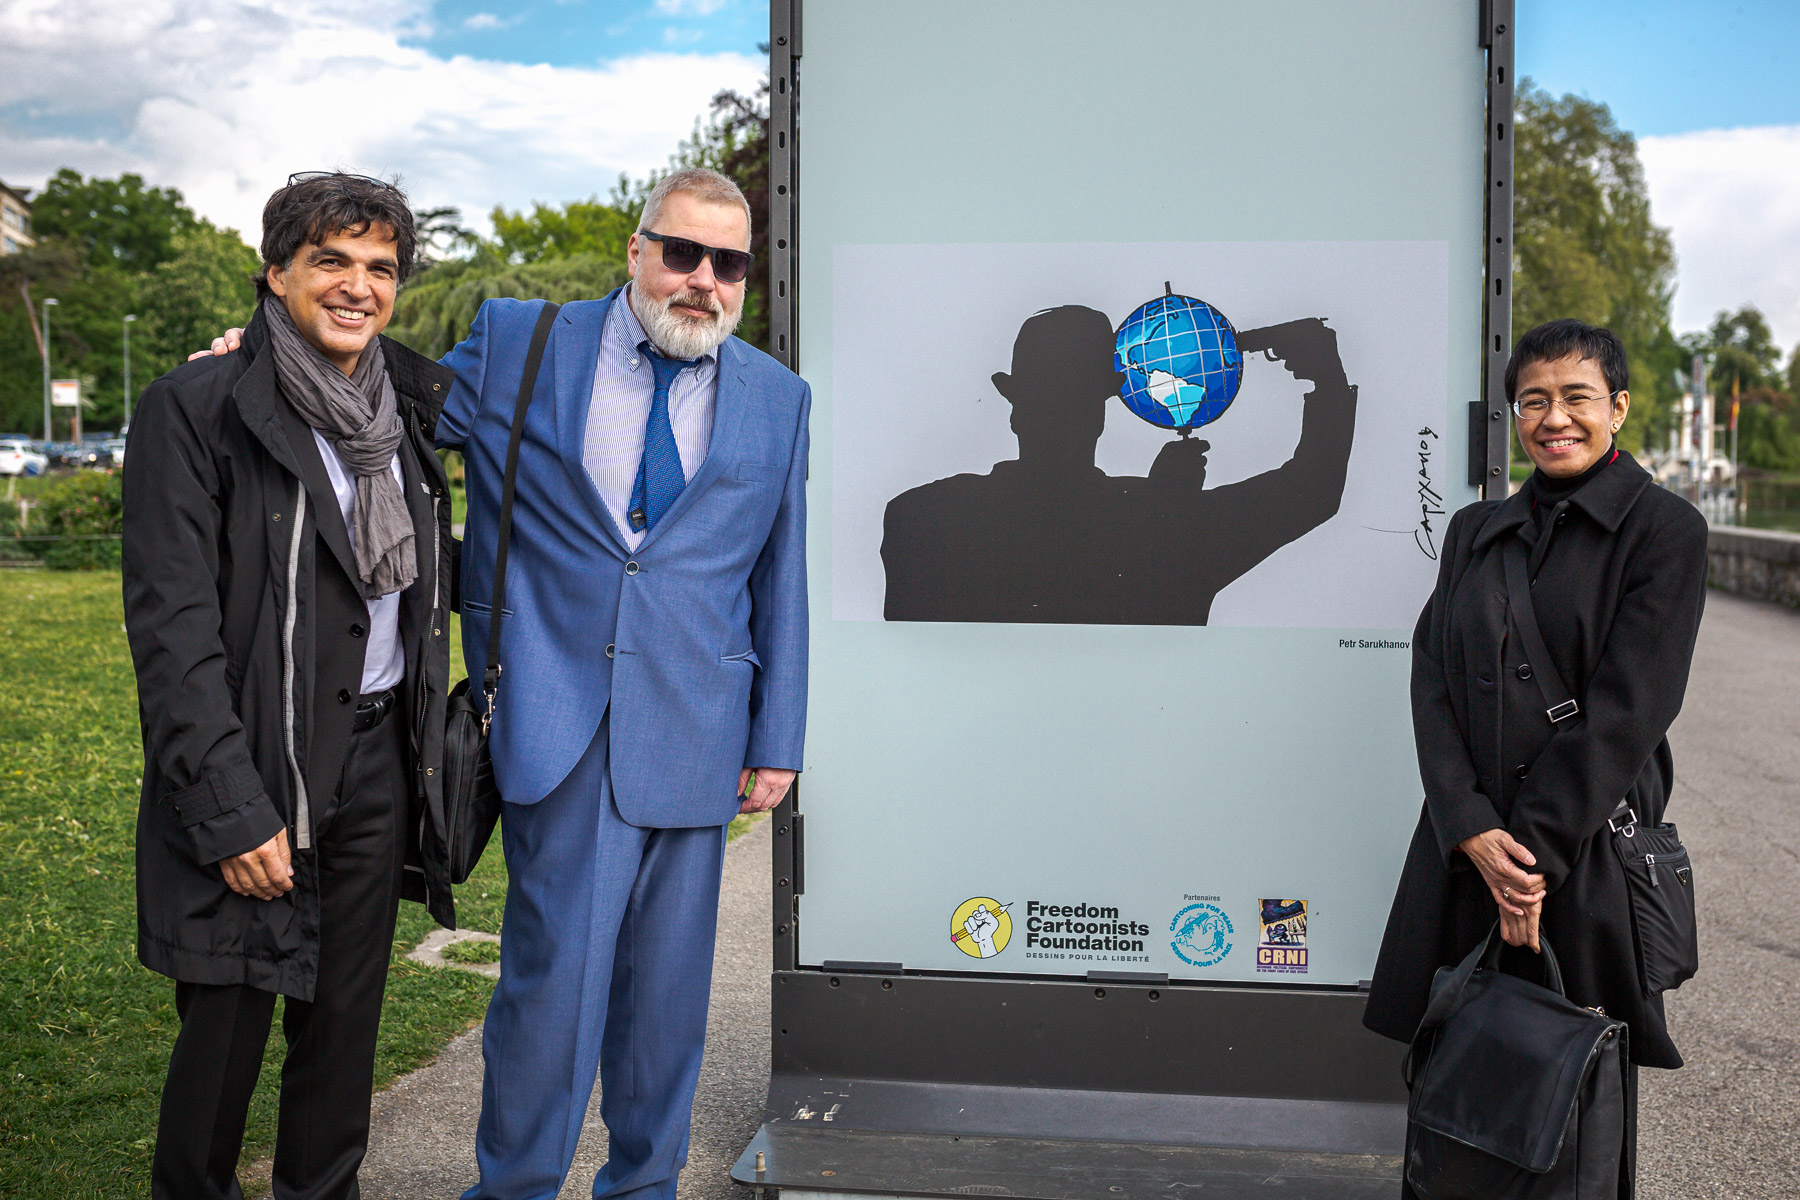 Tour of the international cartoon exhibition of the Freedom Cartoonists Foundation on the shores of Lake Geneva with the Nobel, guided by Chappatte